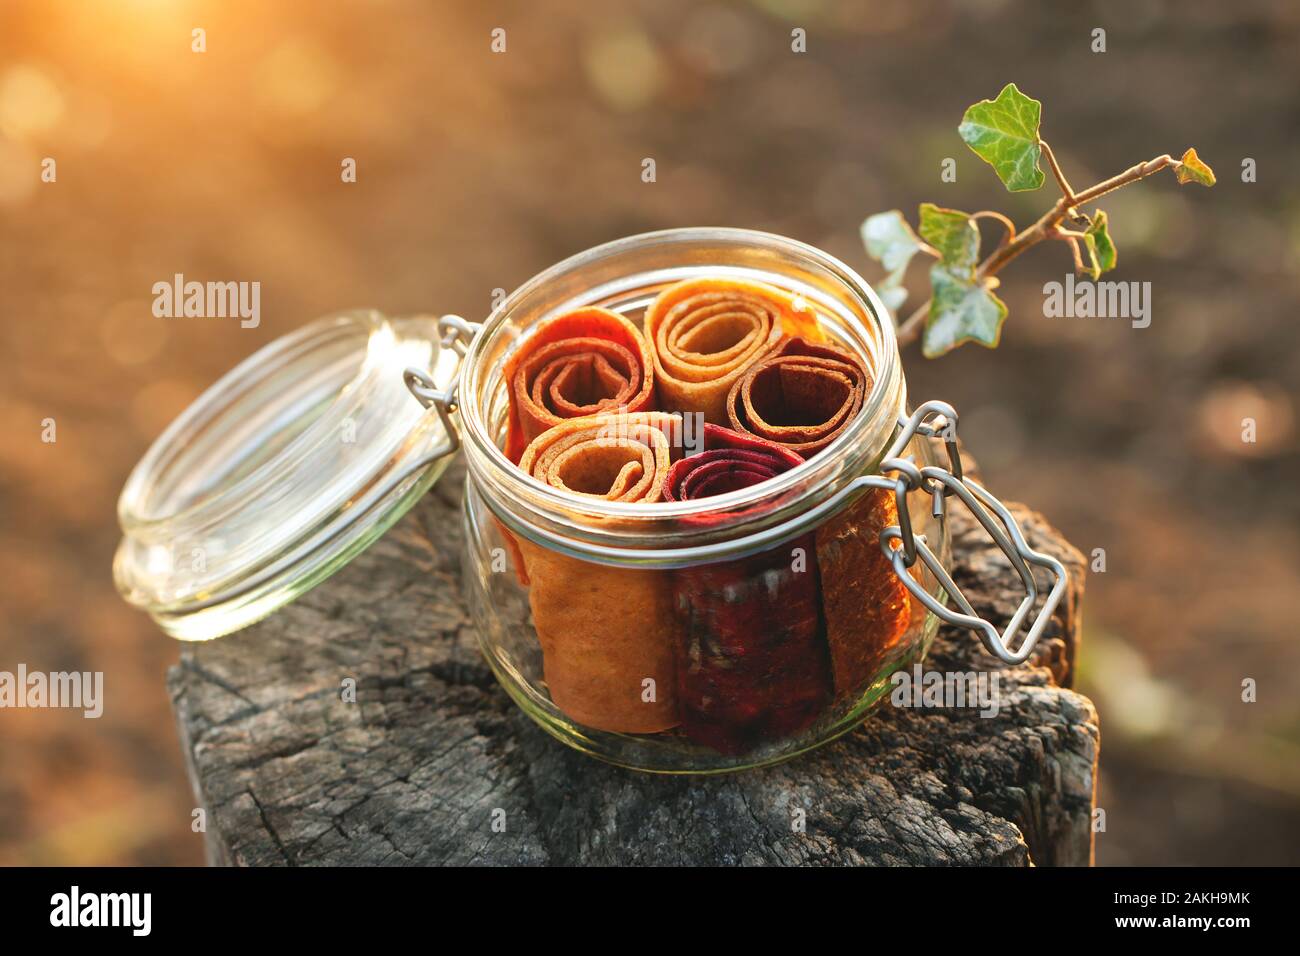 Glass jar with fruit pastille roll-up on a natural background. The concept of healthy organic sweets, proper nutrition, zero waste, vegan. Stock Photo